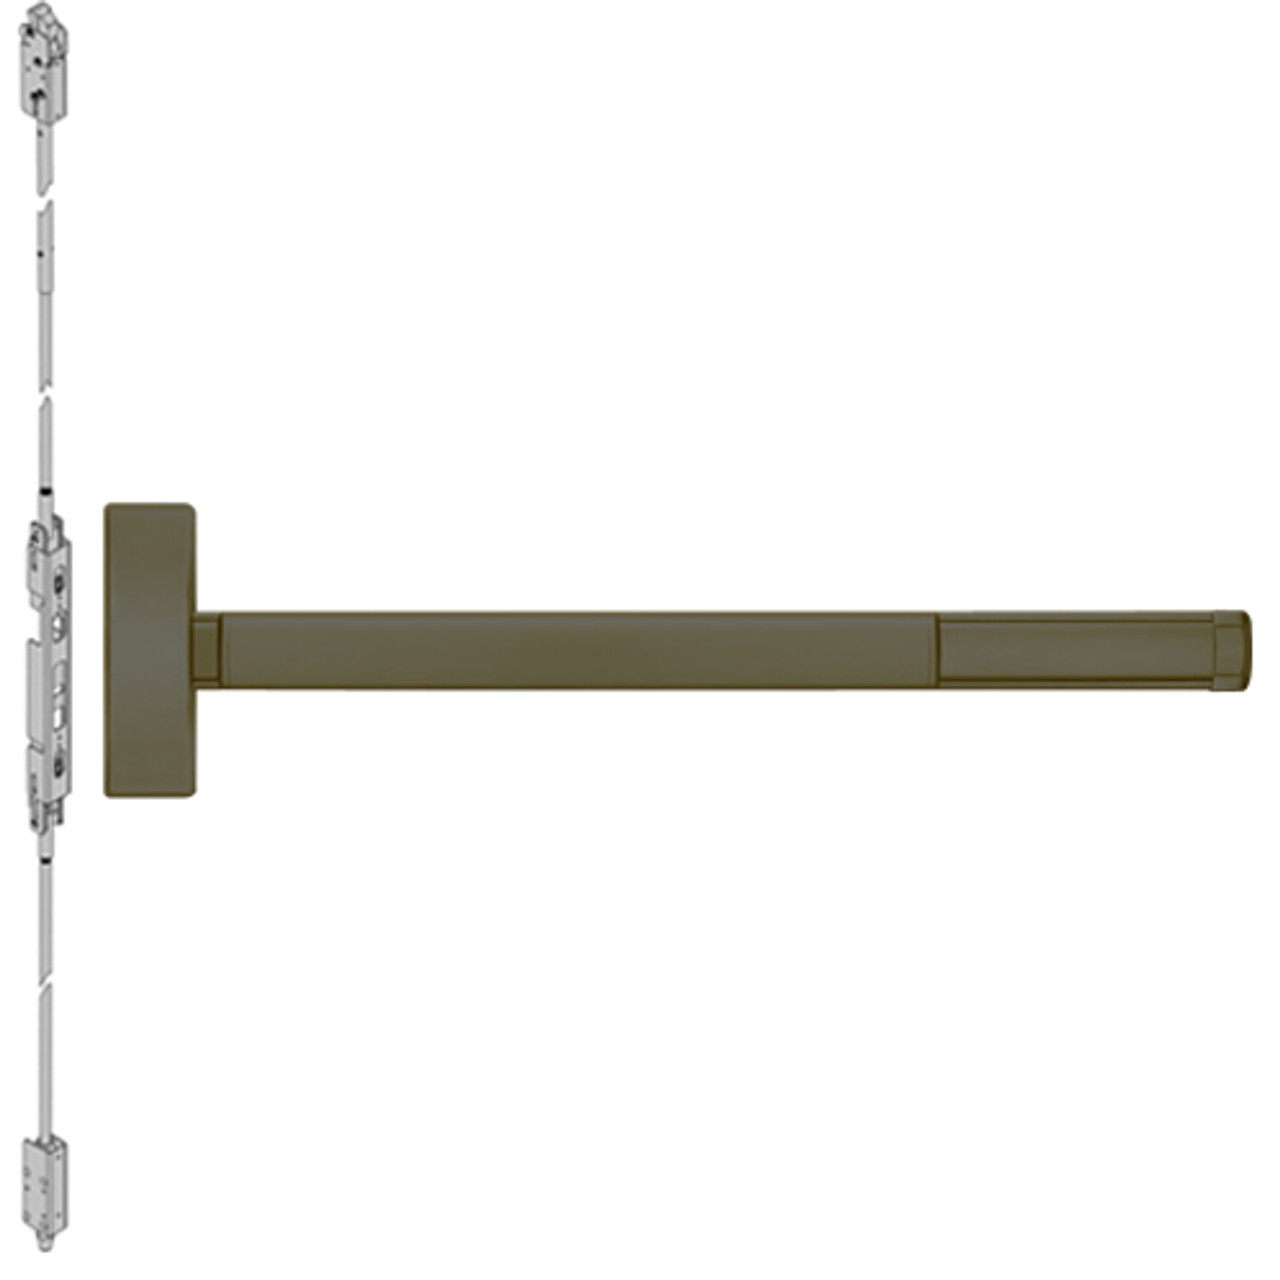 TSFL2803-613-36 PHI 2800 Series Fire Rated Concealed Vertical Rod Exit Device with Touchbar Monitoring Switch Prepped for Key Retracts Latchbolt in Oil Rubbed Bronze Finish